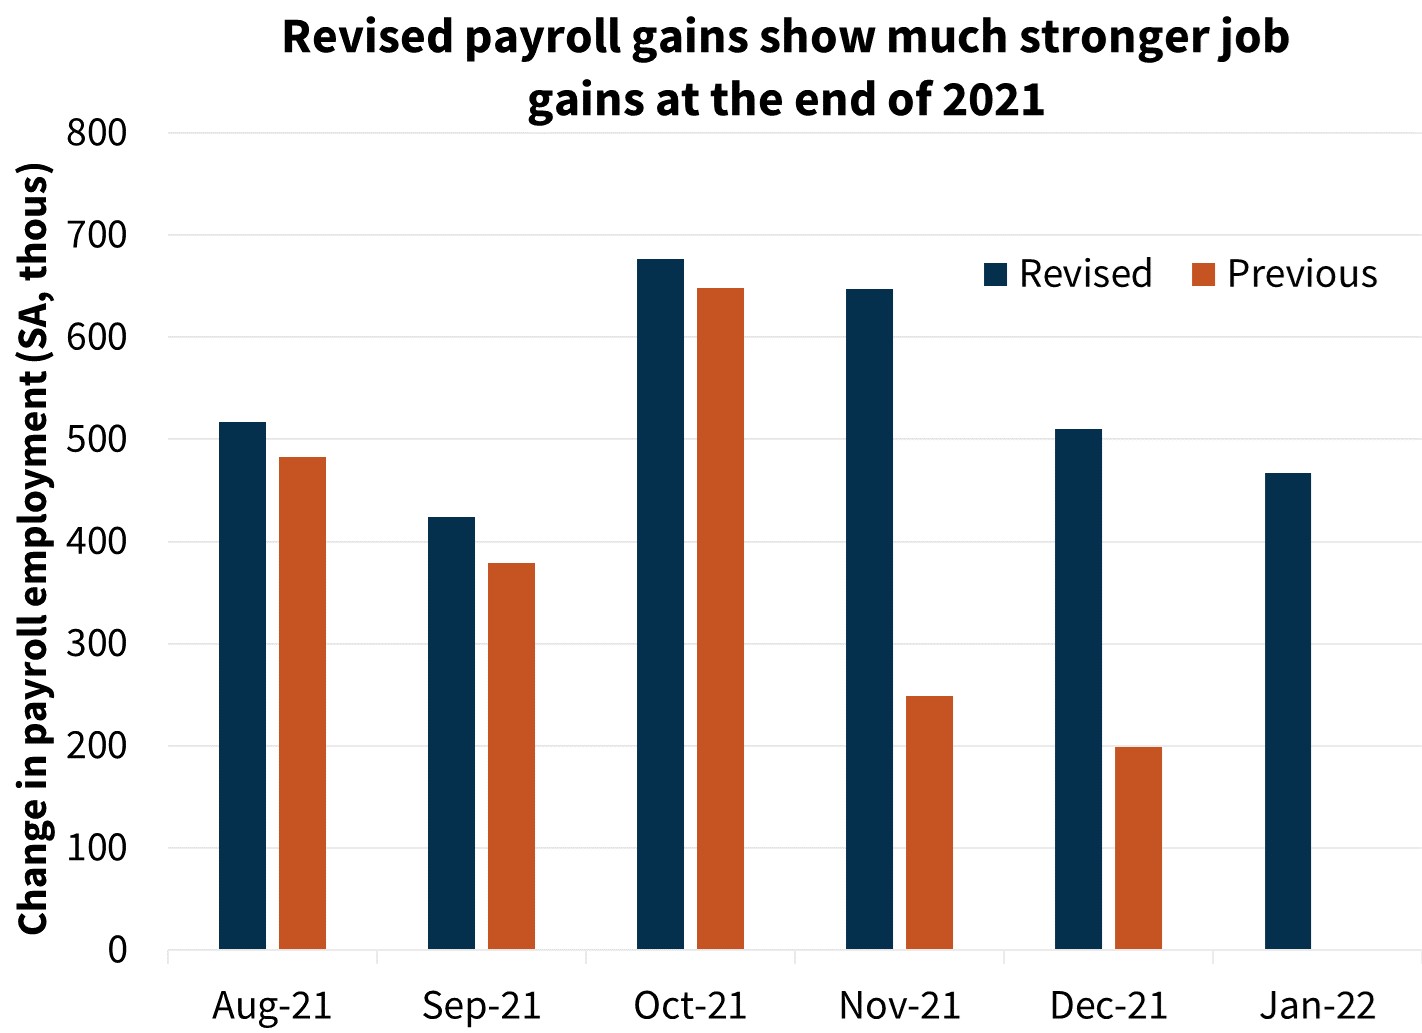 Revised payroll gains show much stronger job gains at the end of 2021